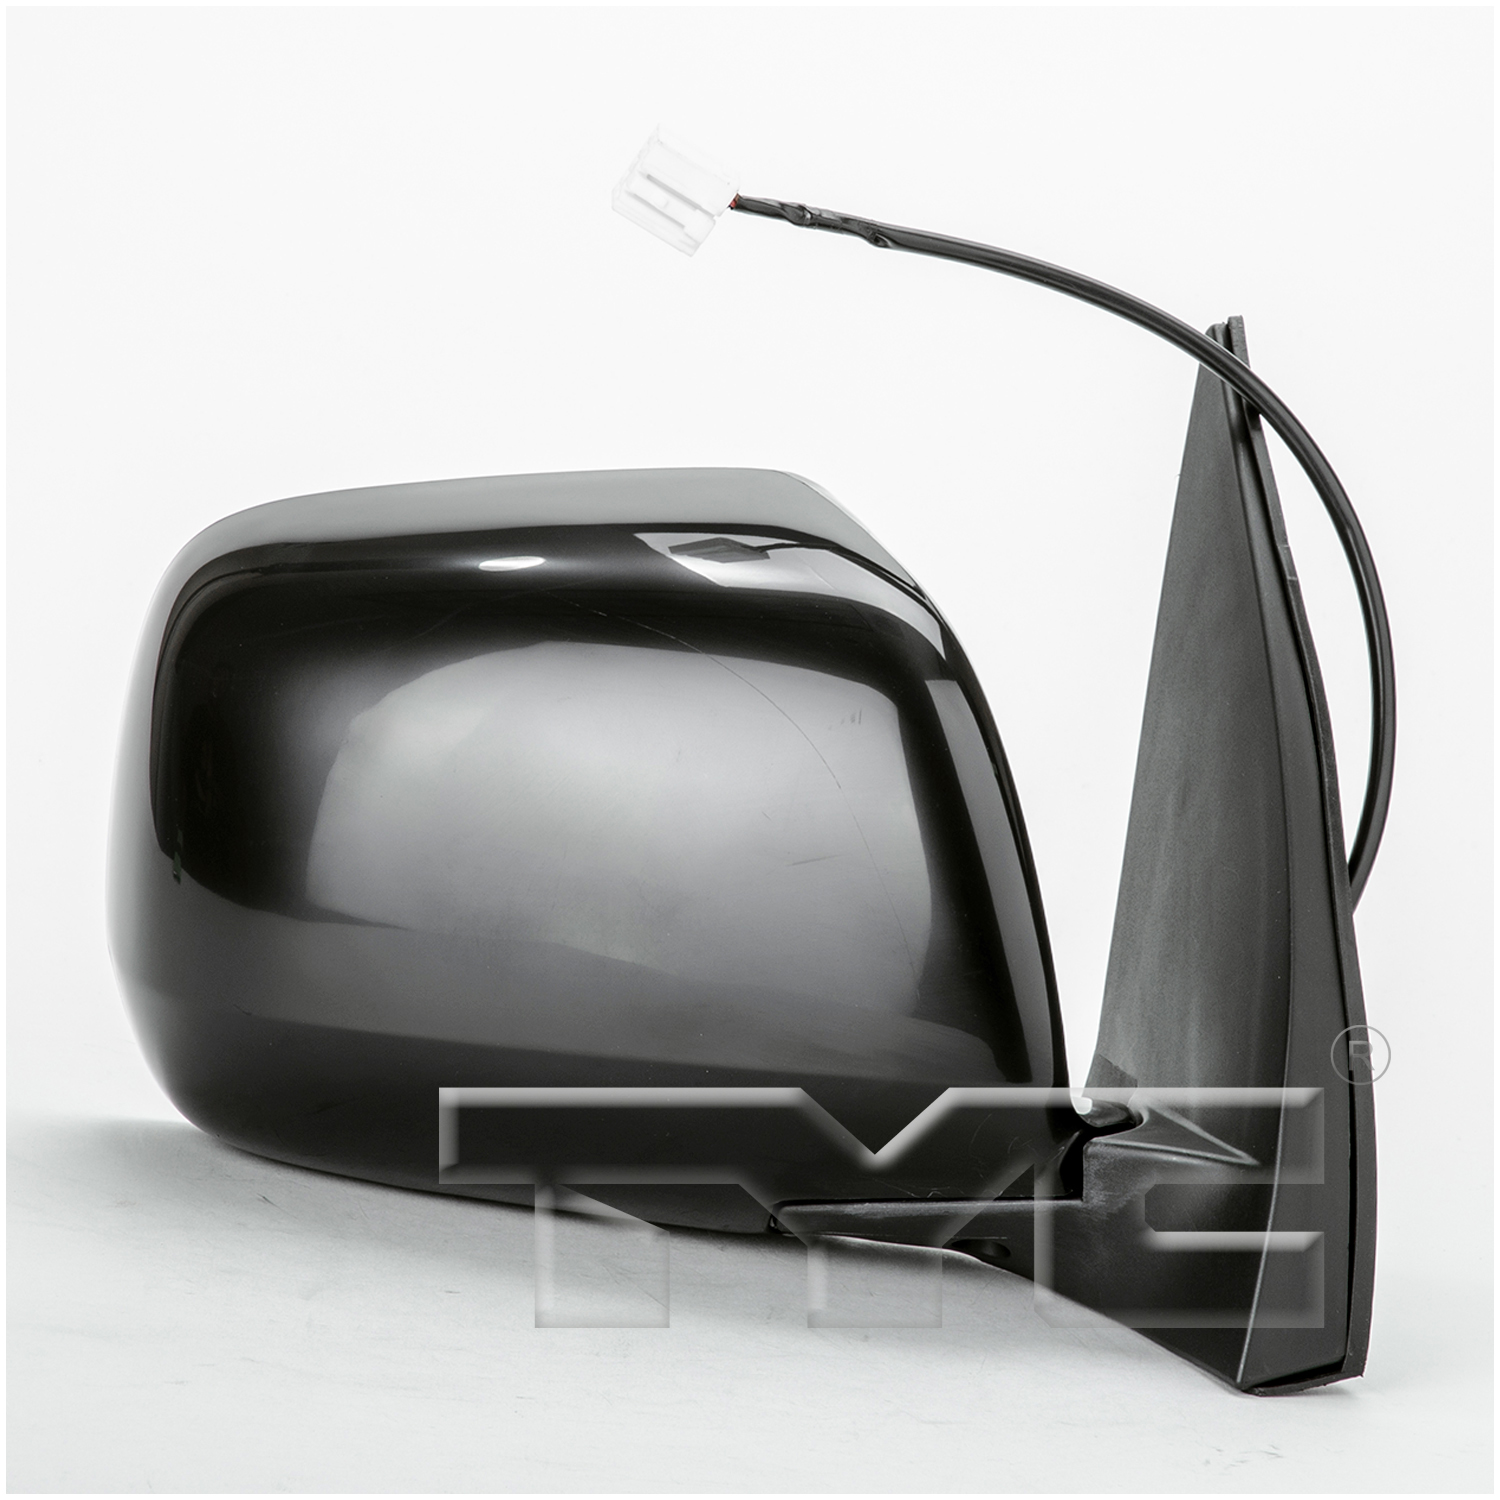 Aftermarket MIRRORS for TOYOTA - HIGHLANDER, HIGHLANDER,01-07,RT Mirror outside rear view